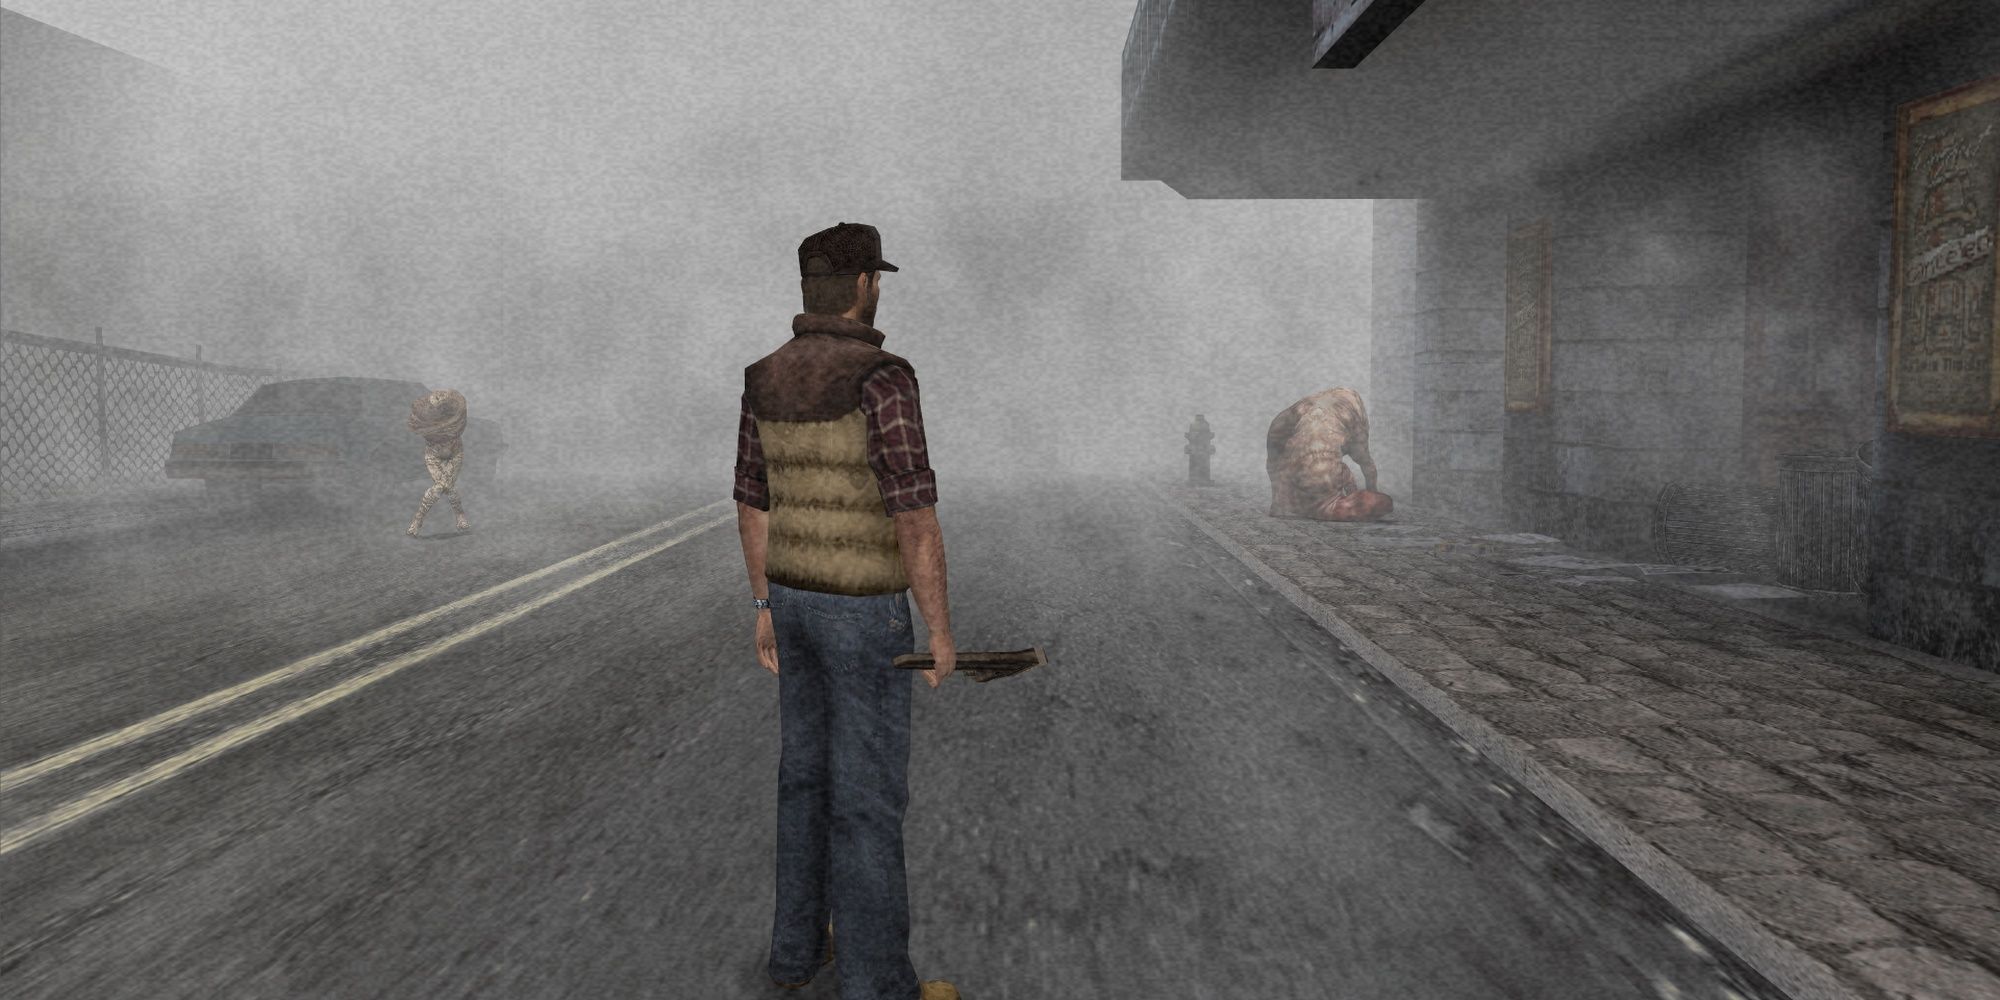 Silent Hill Origins: Travis Walking Through The Foggy Streets Of Silent Hill